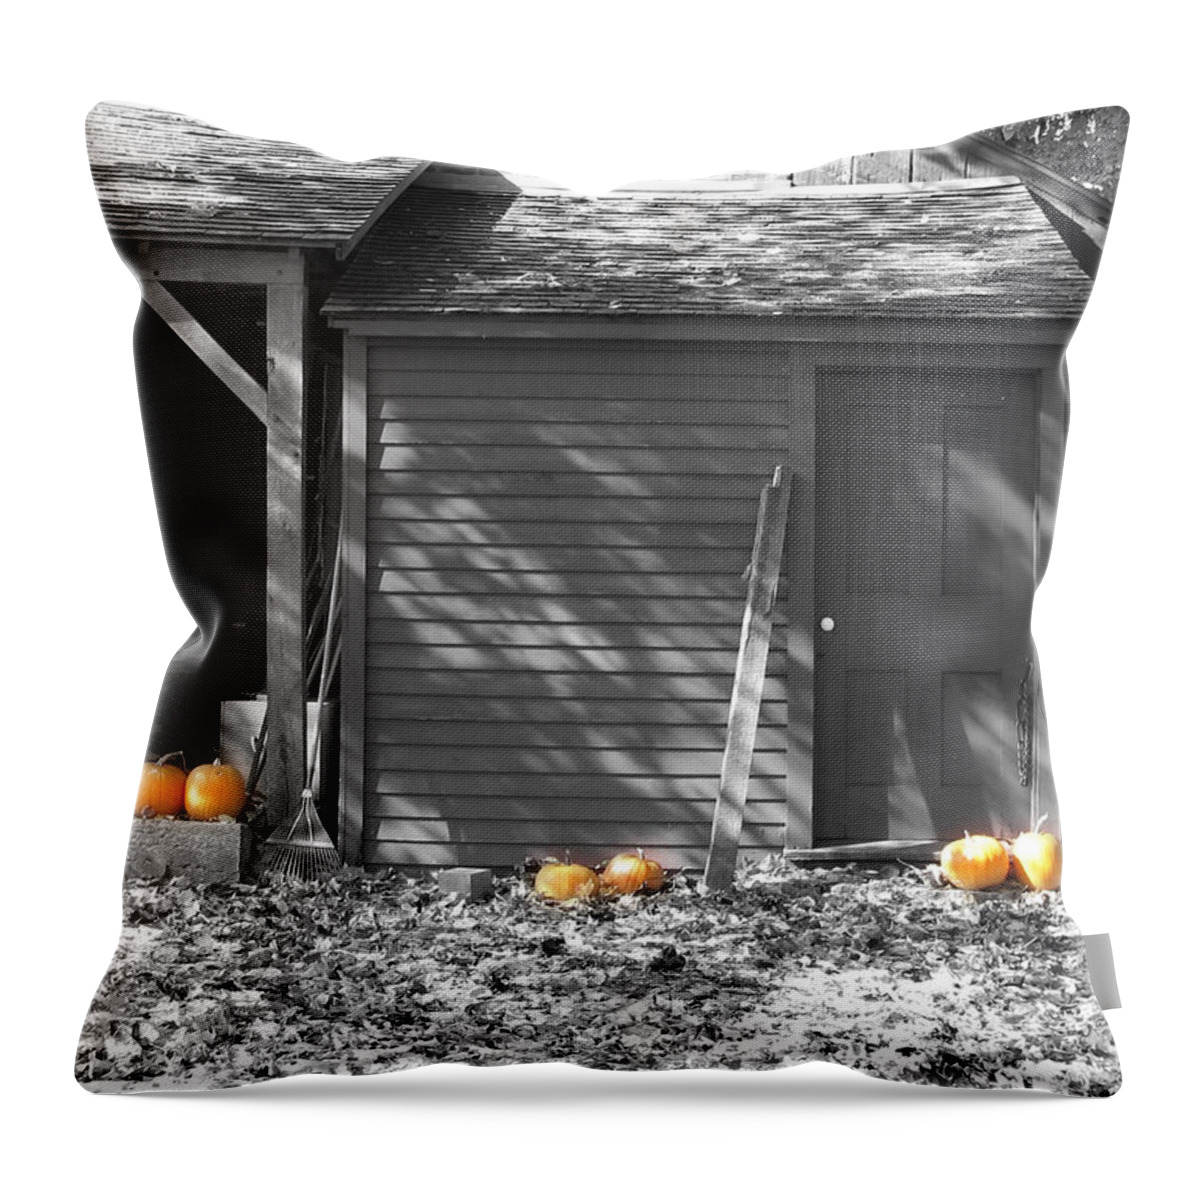 Autumn Throw Pillow featuring the photograph Autumn Rest by David Bader